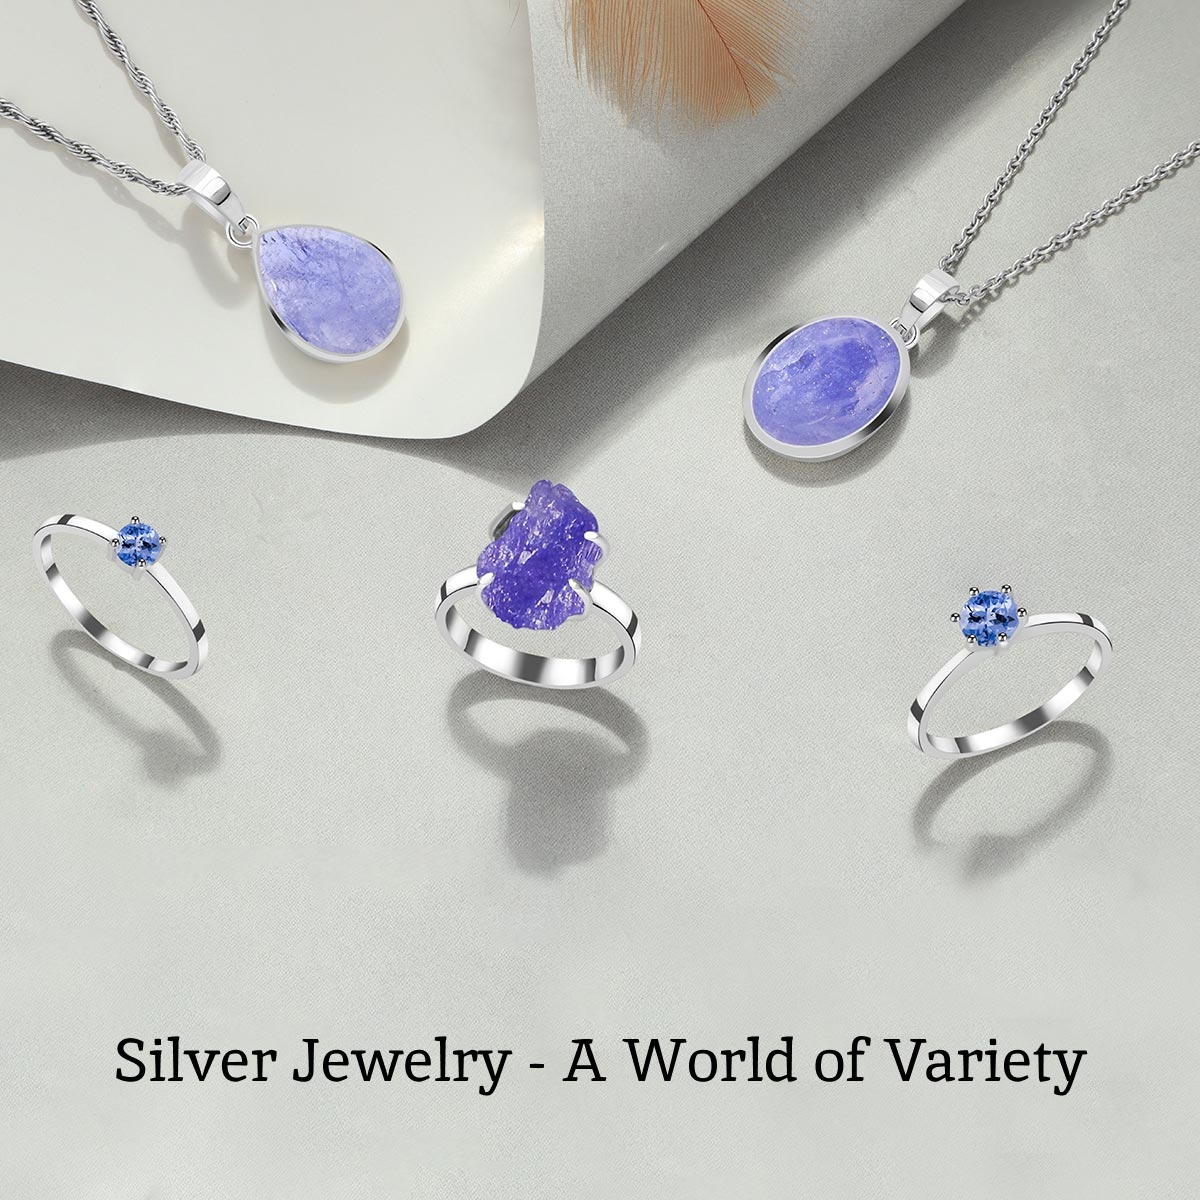 What are the different types of silver jewelry?